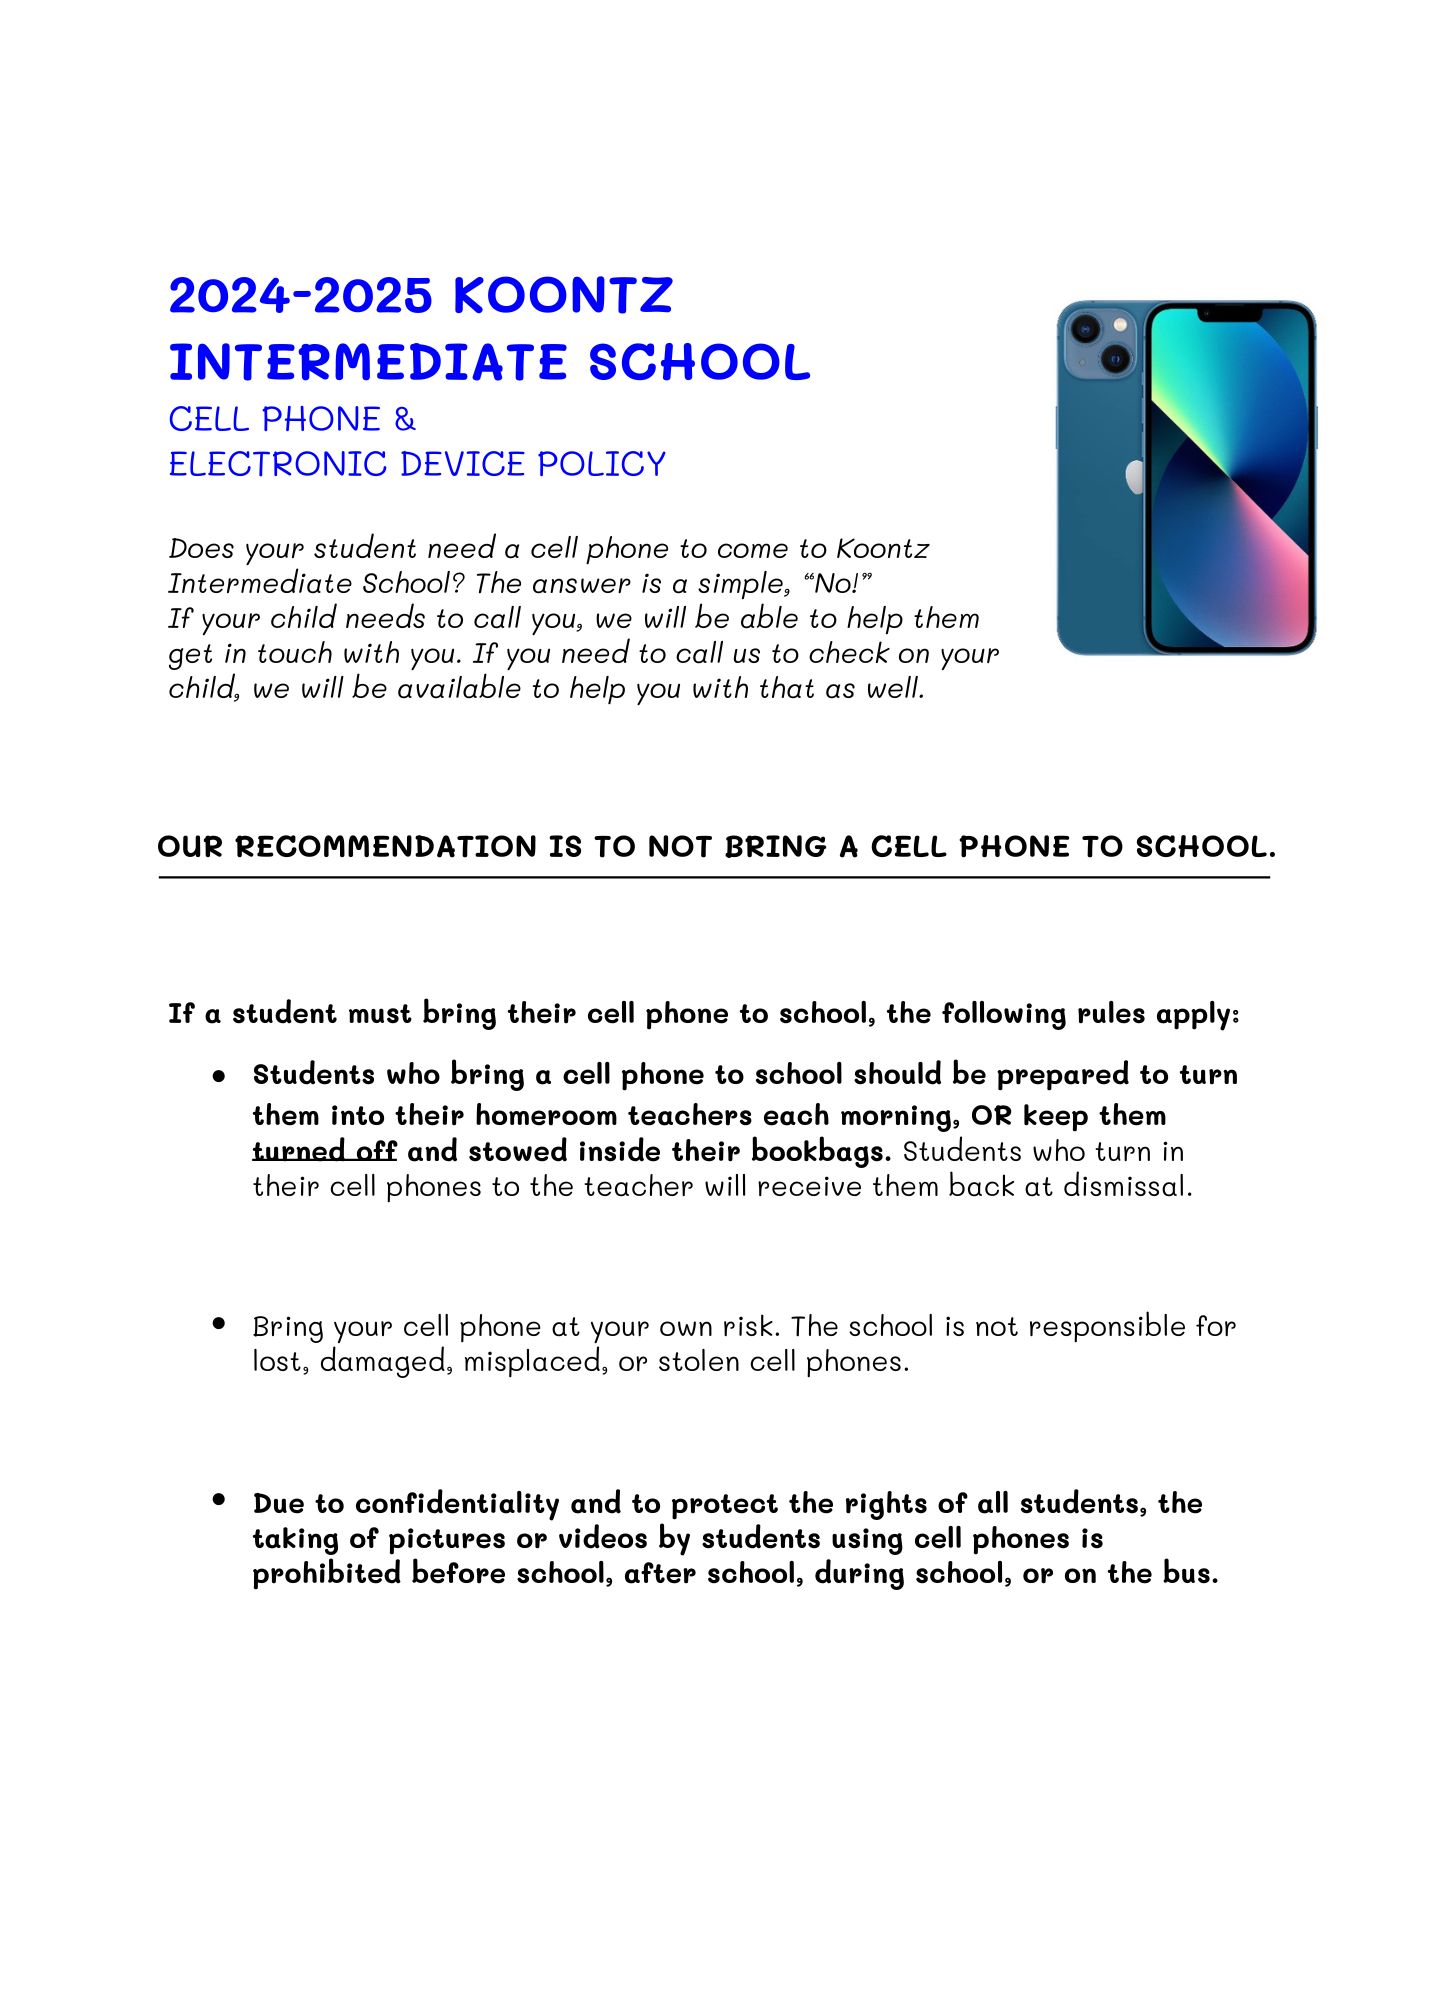 Cell Phone Use Policy